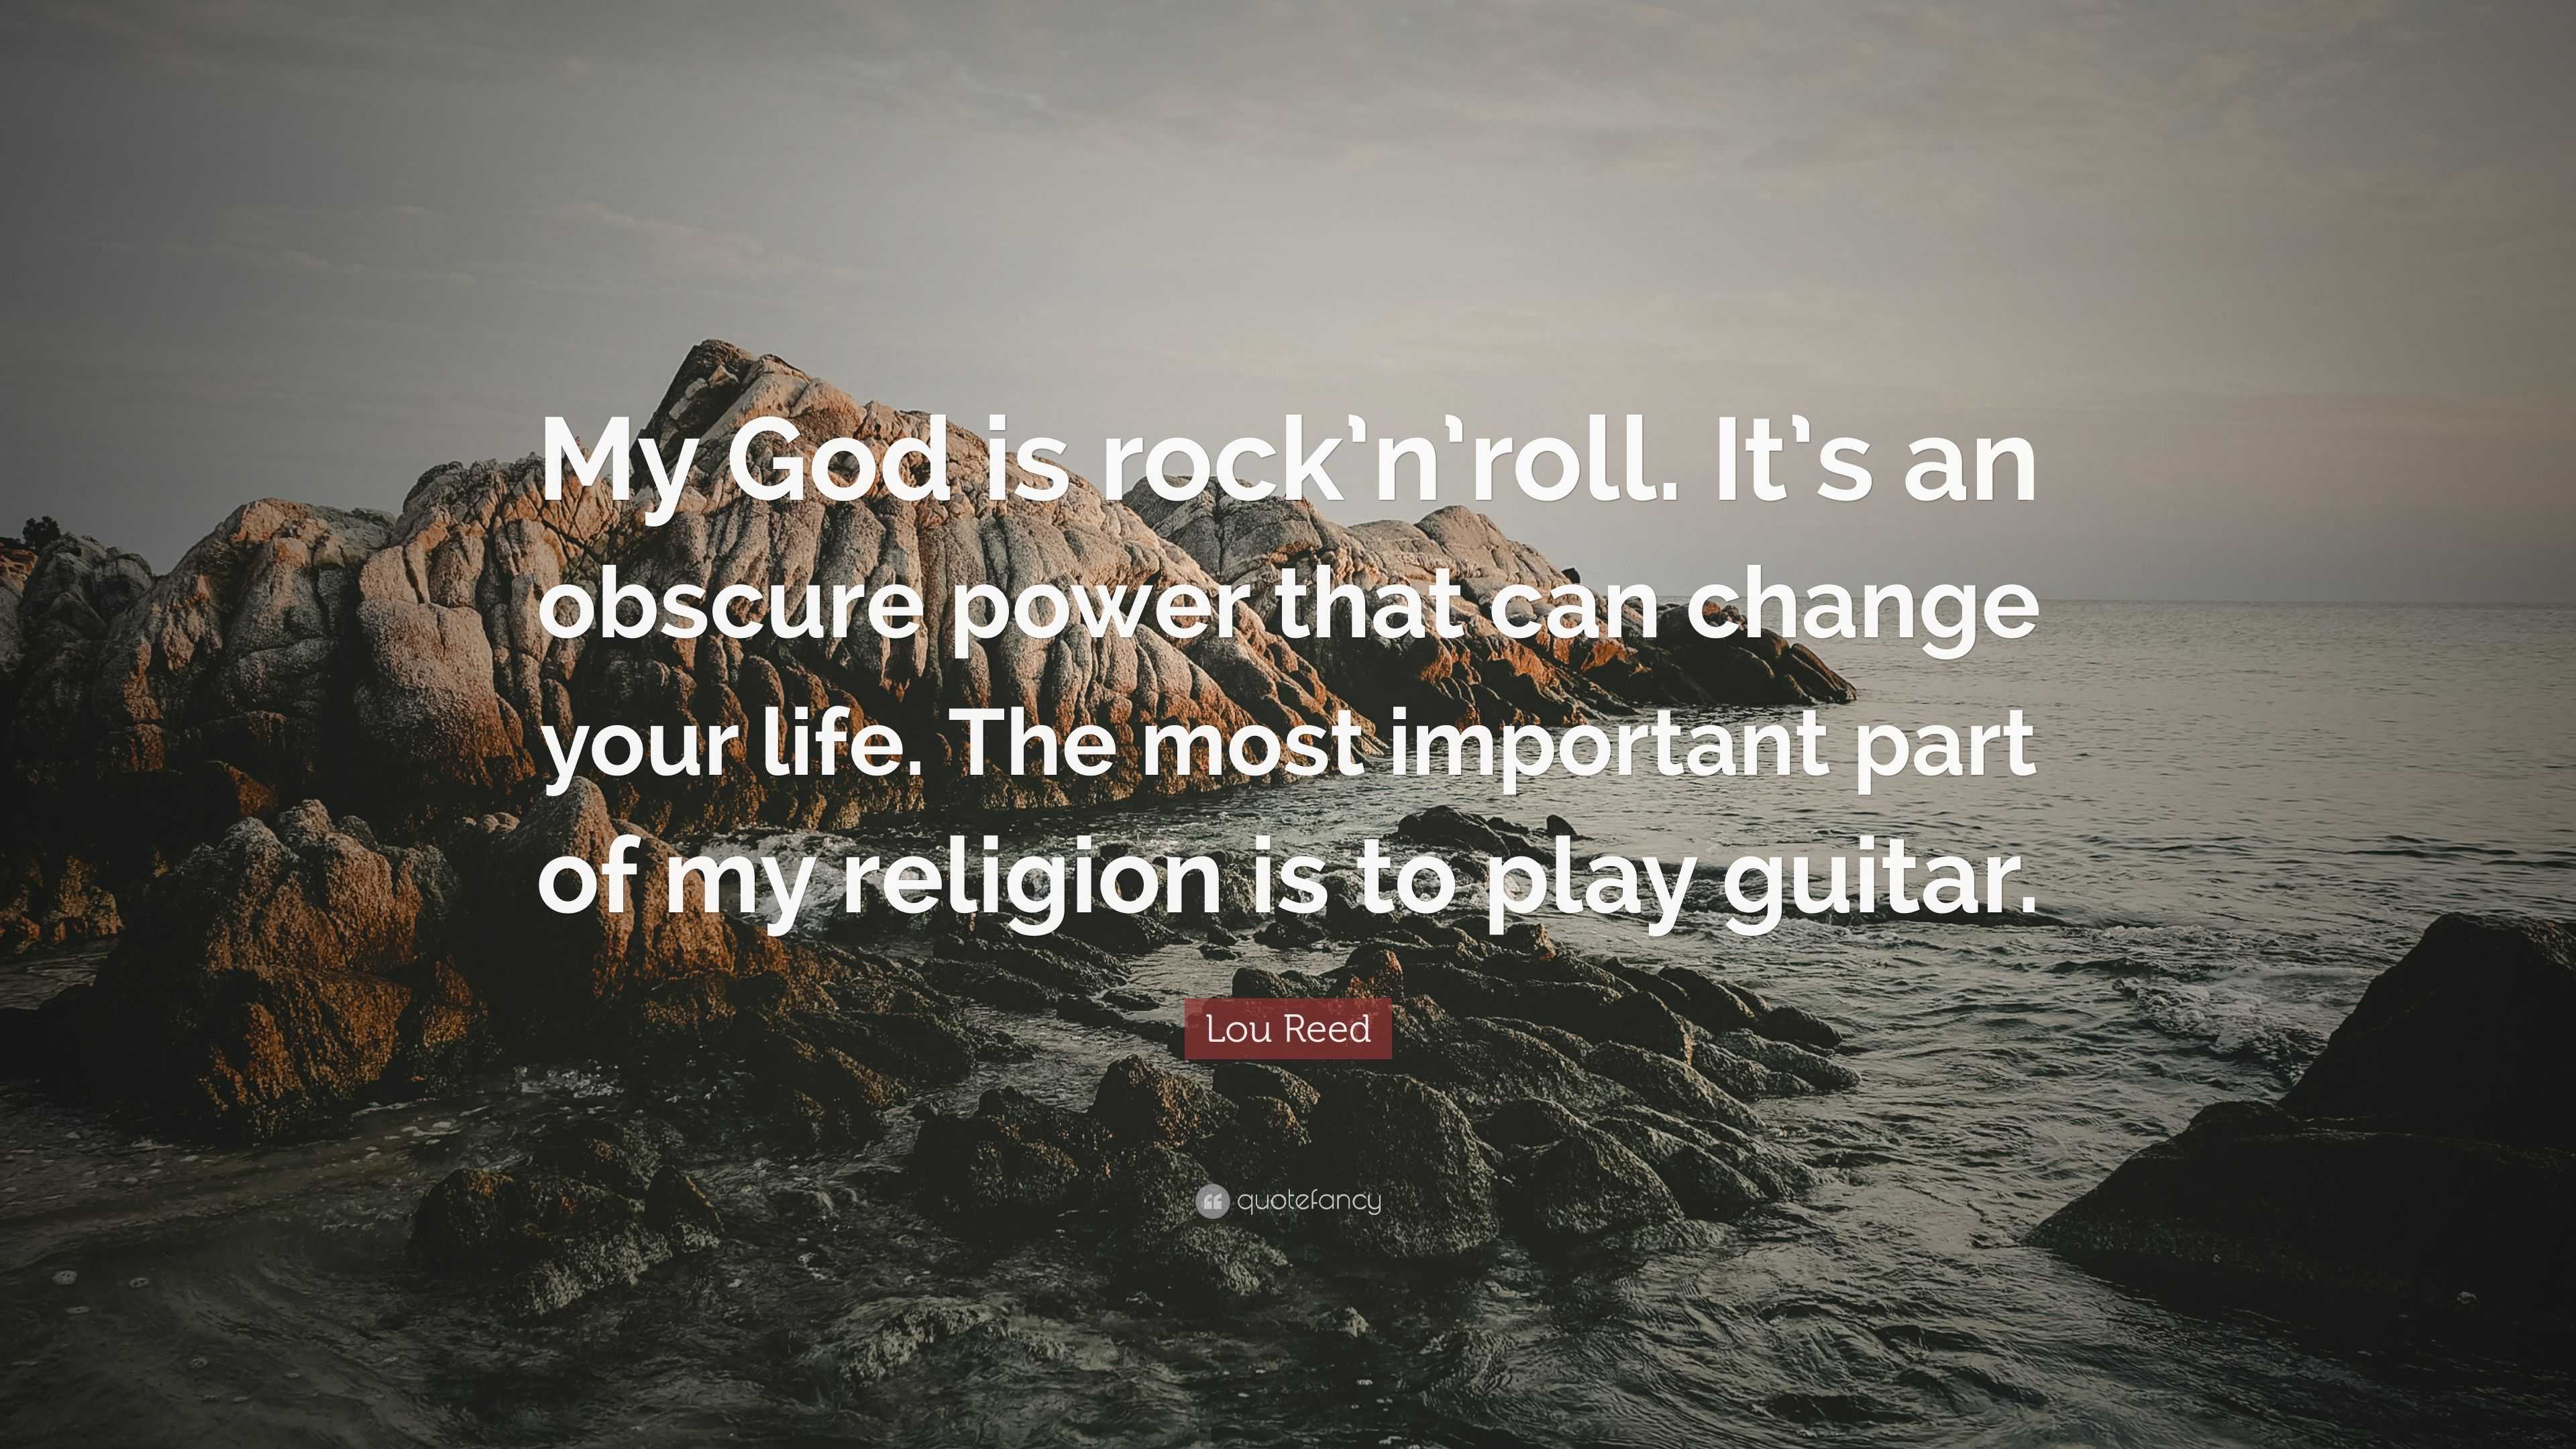 Lou Reed Quote: “My God is rock’n’roll. It’s an obscure power that can